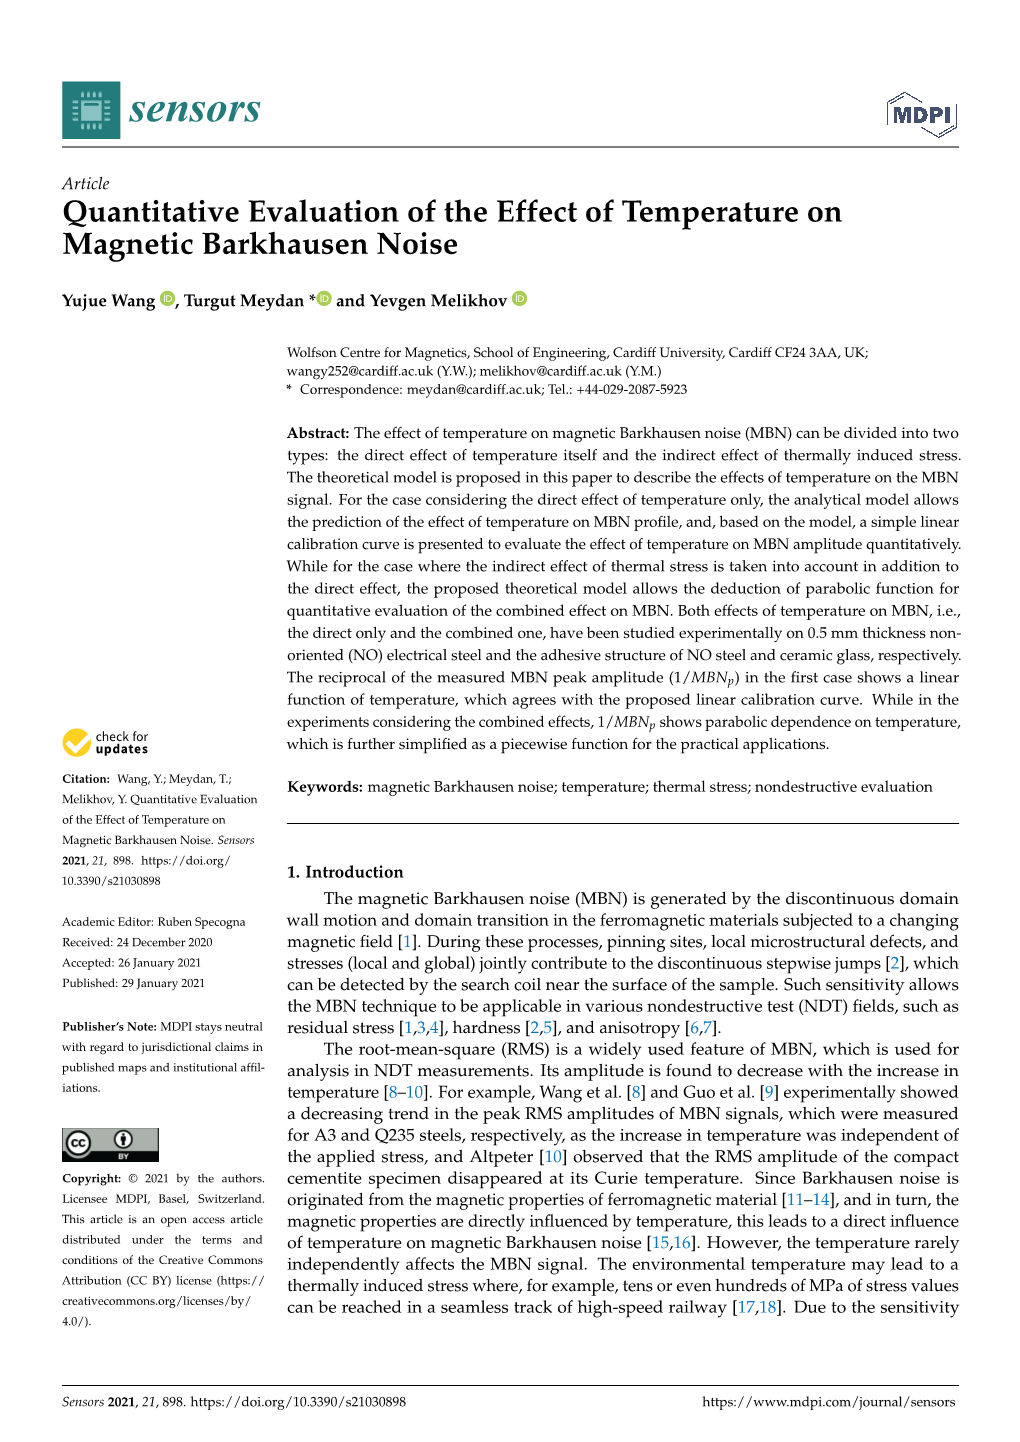 Quantitative Evaluation of the Effect of Temperature on Magnetic Barkhausen Noise